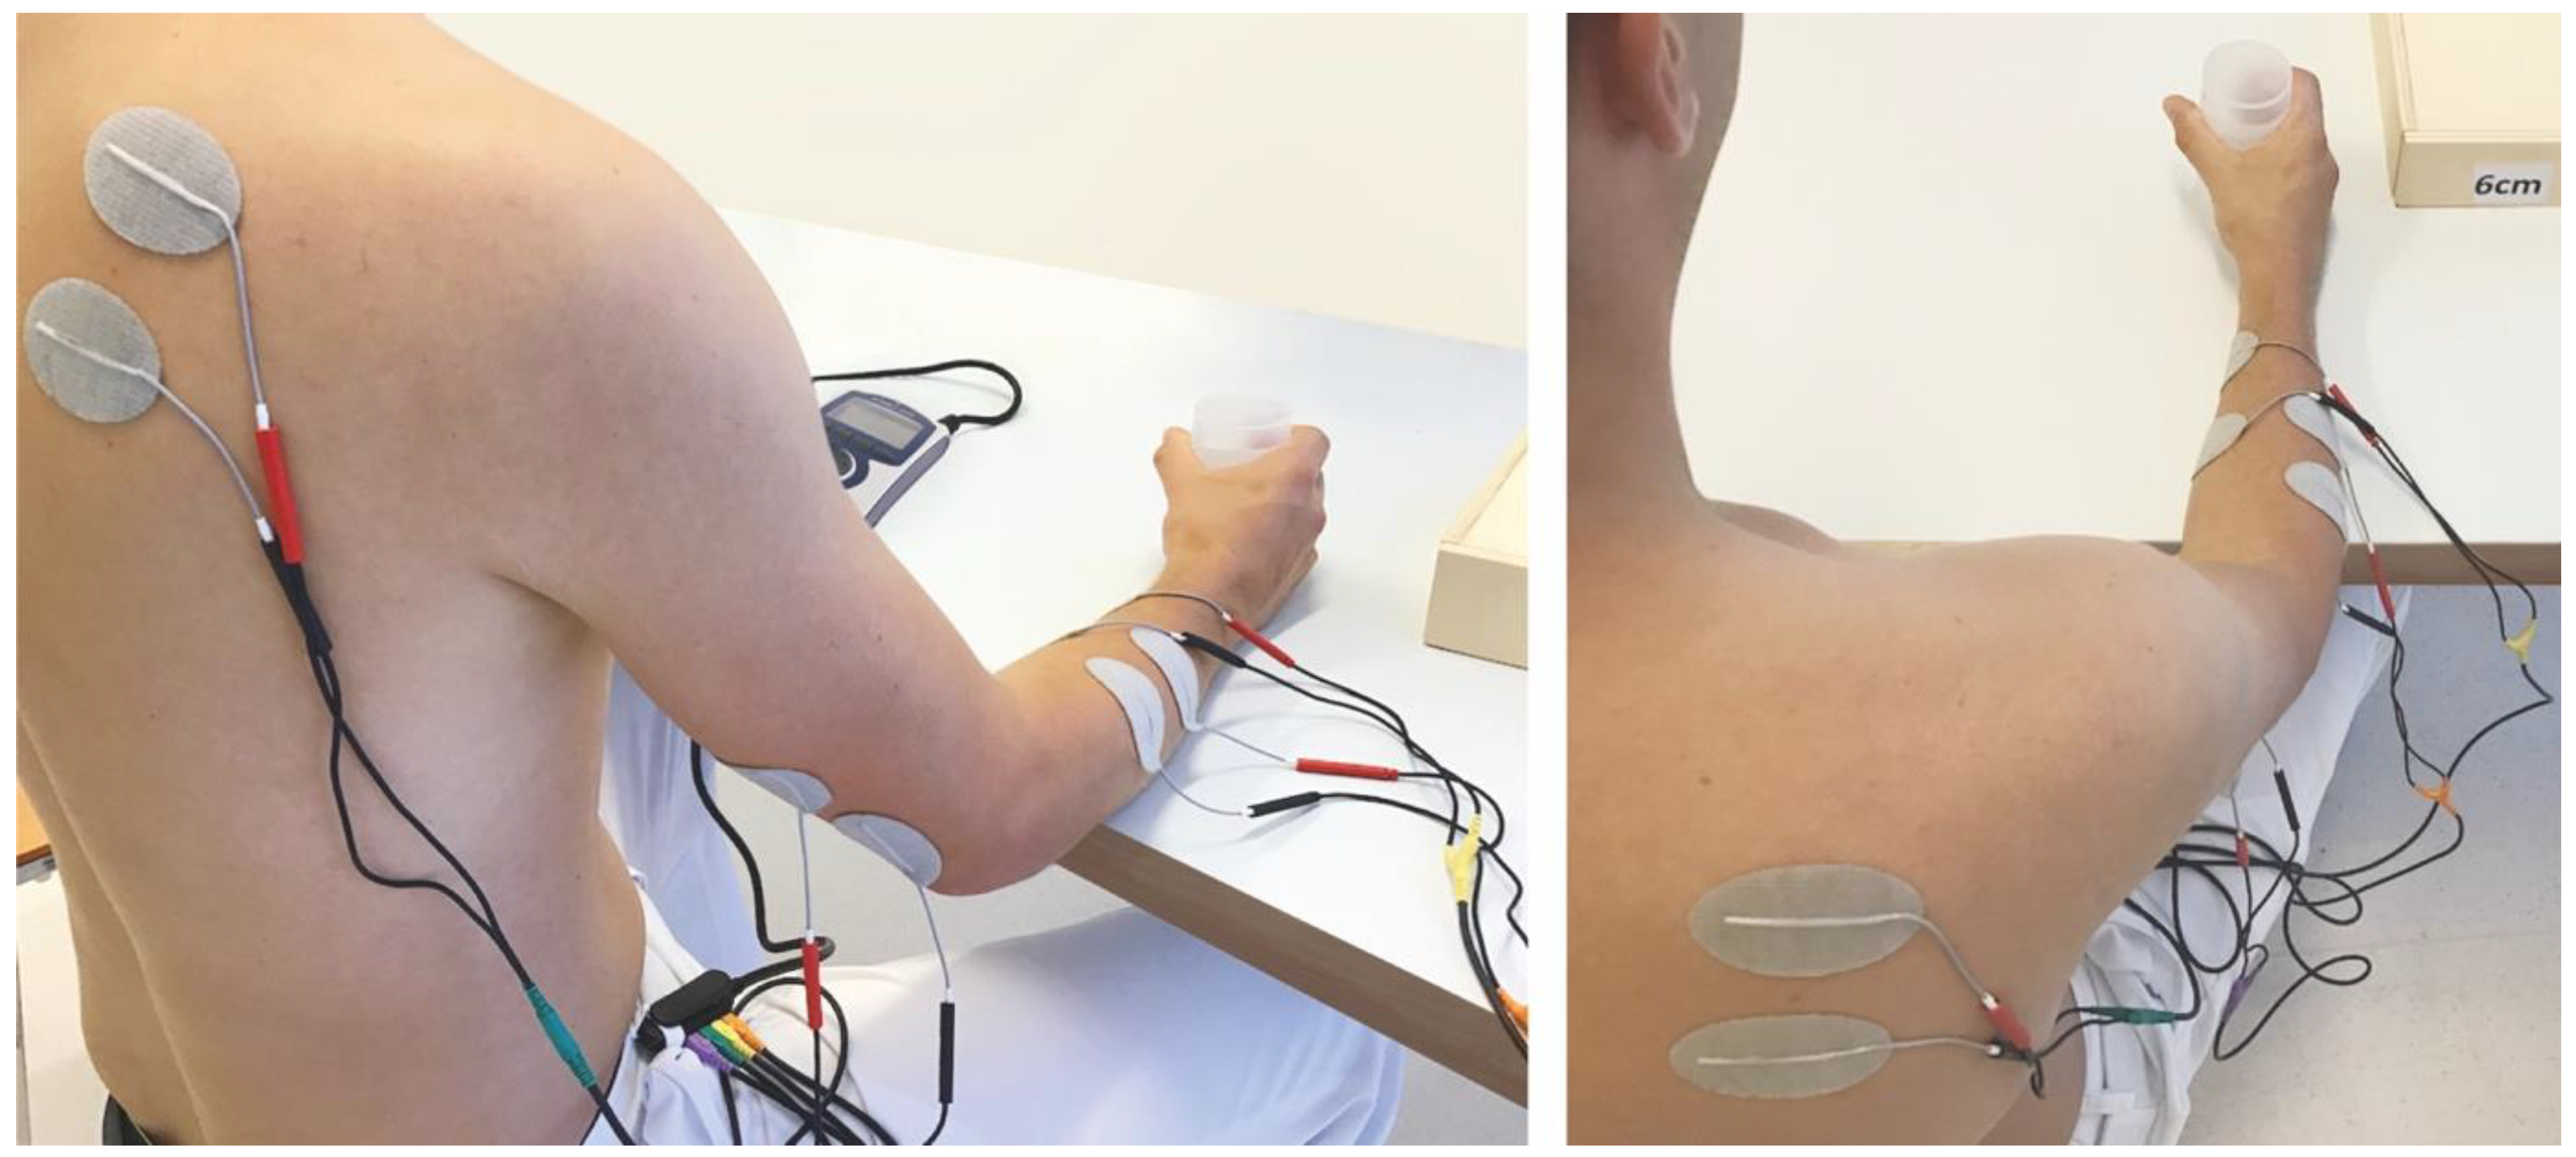 Electrical stimulation for therapeutic approach - Kim - 2023